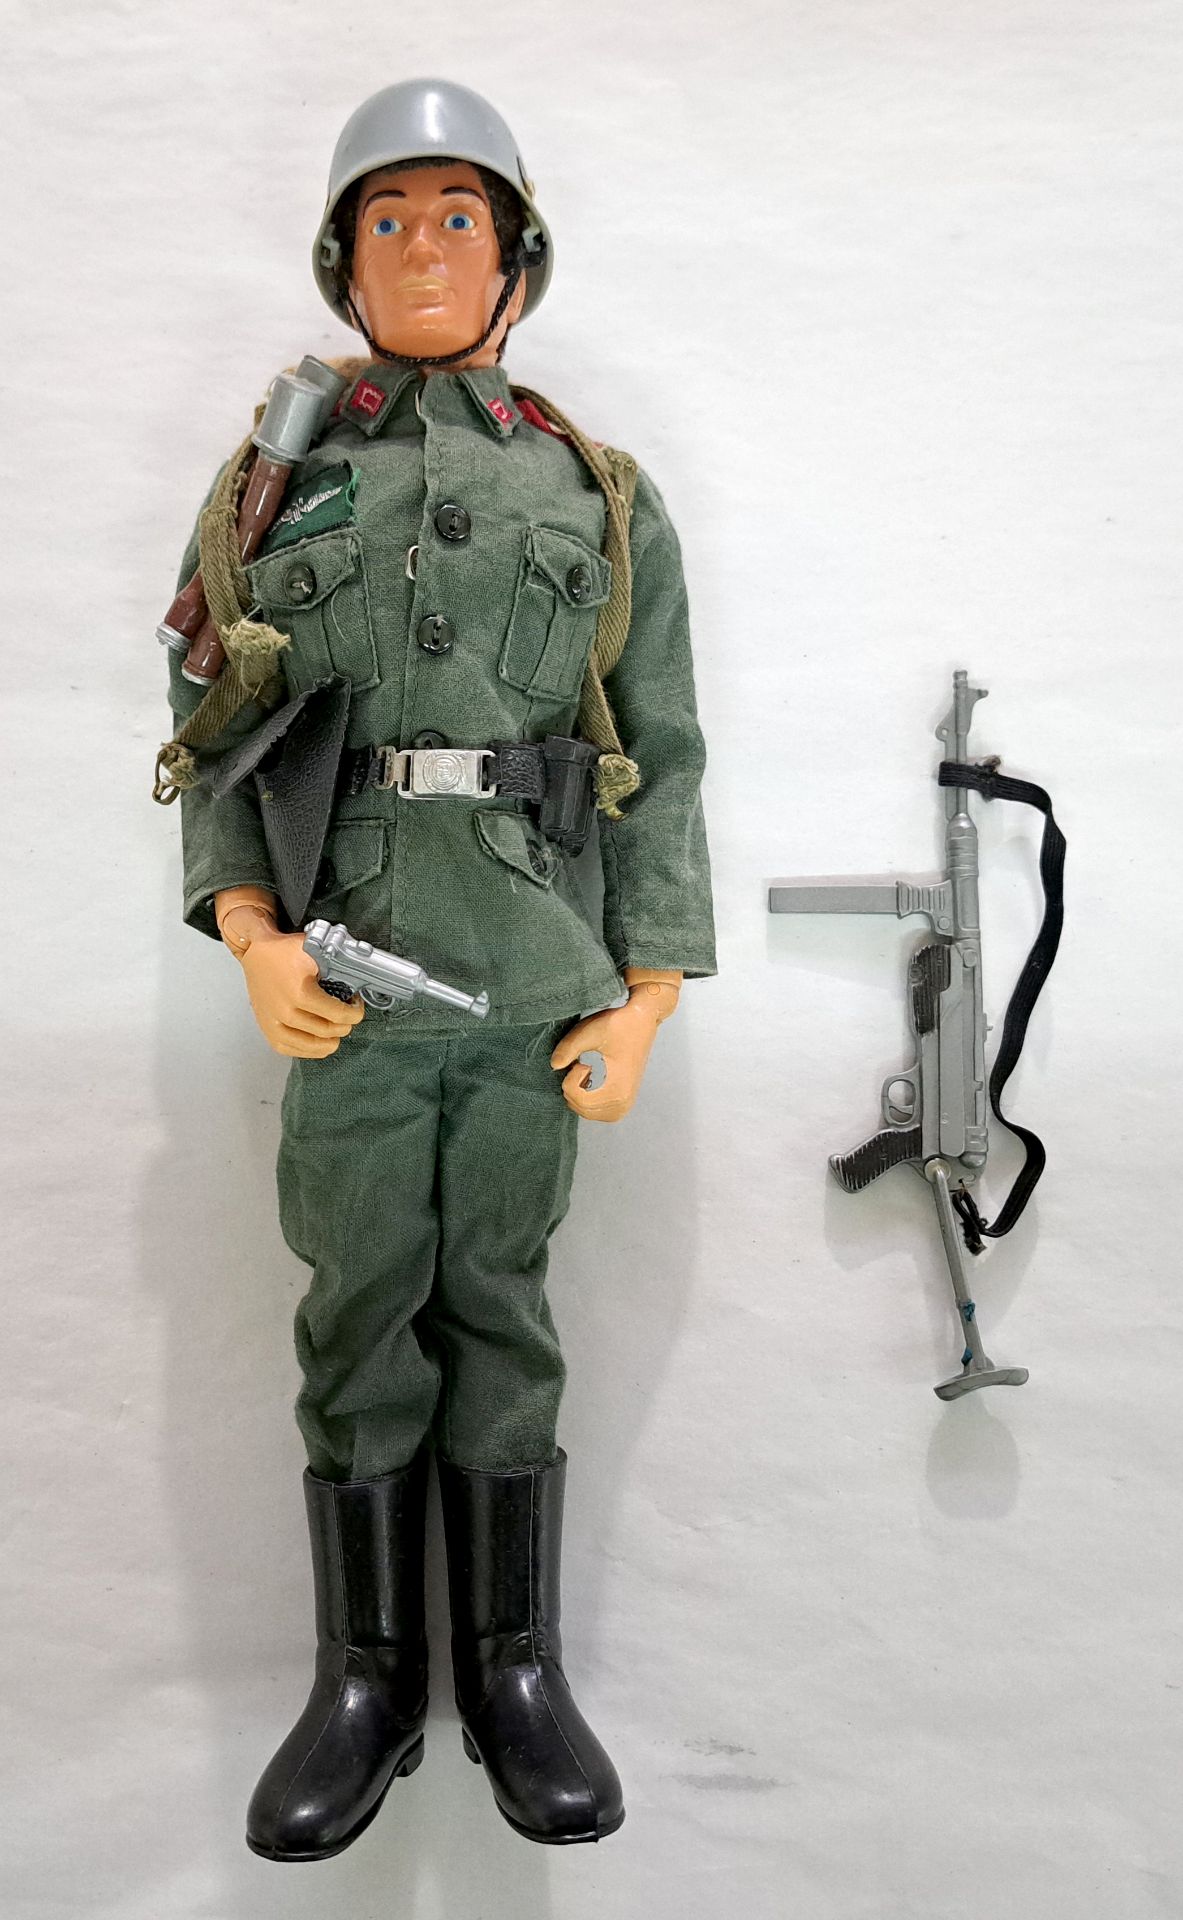 Palitoy Action Man German Stormtrooper - Soldiers of the World, dark hair, blue pants, eagle-eyes...